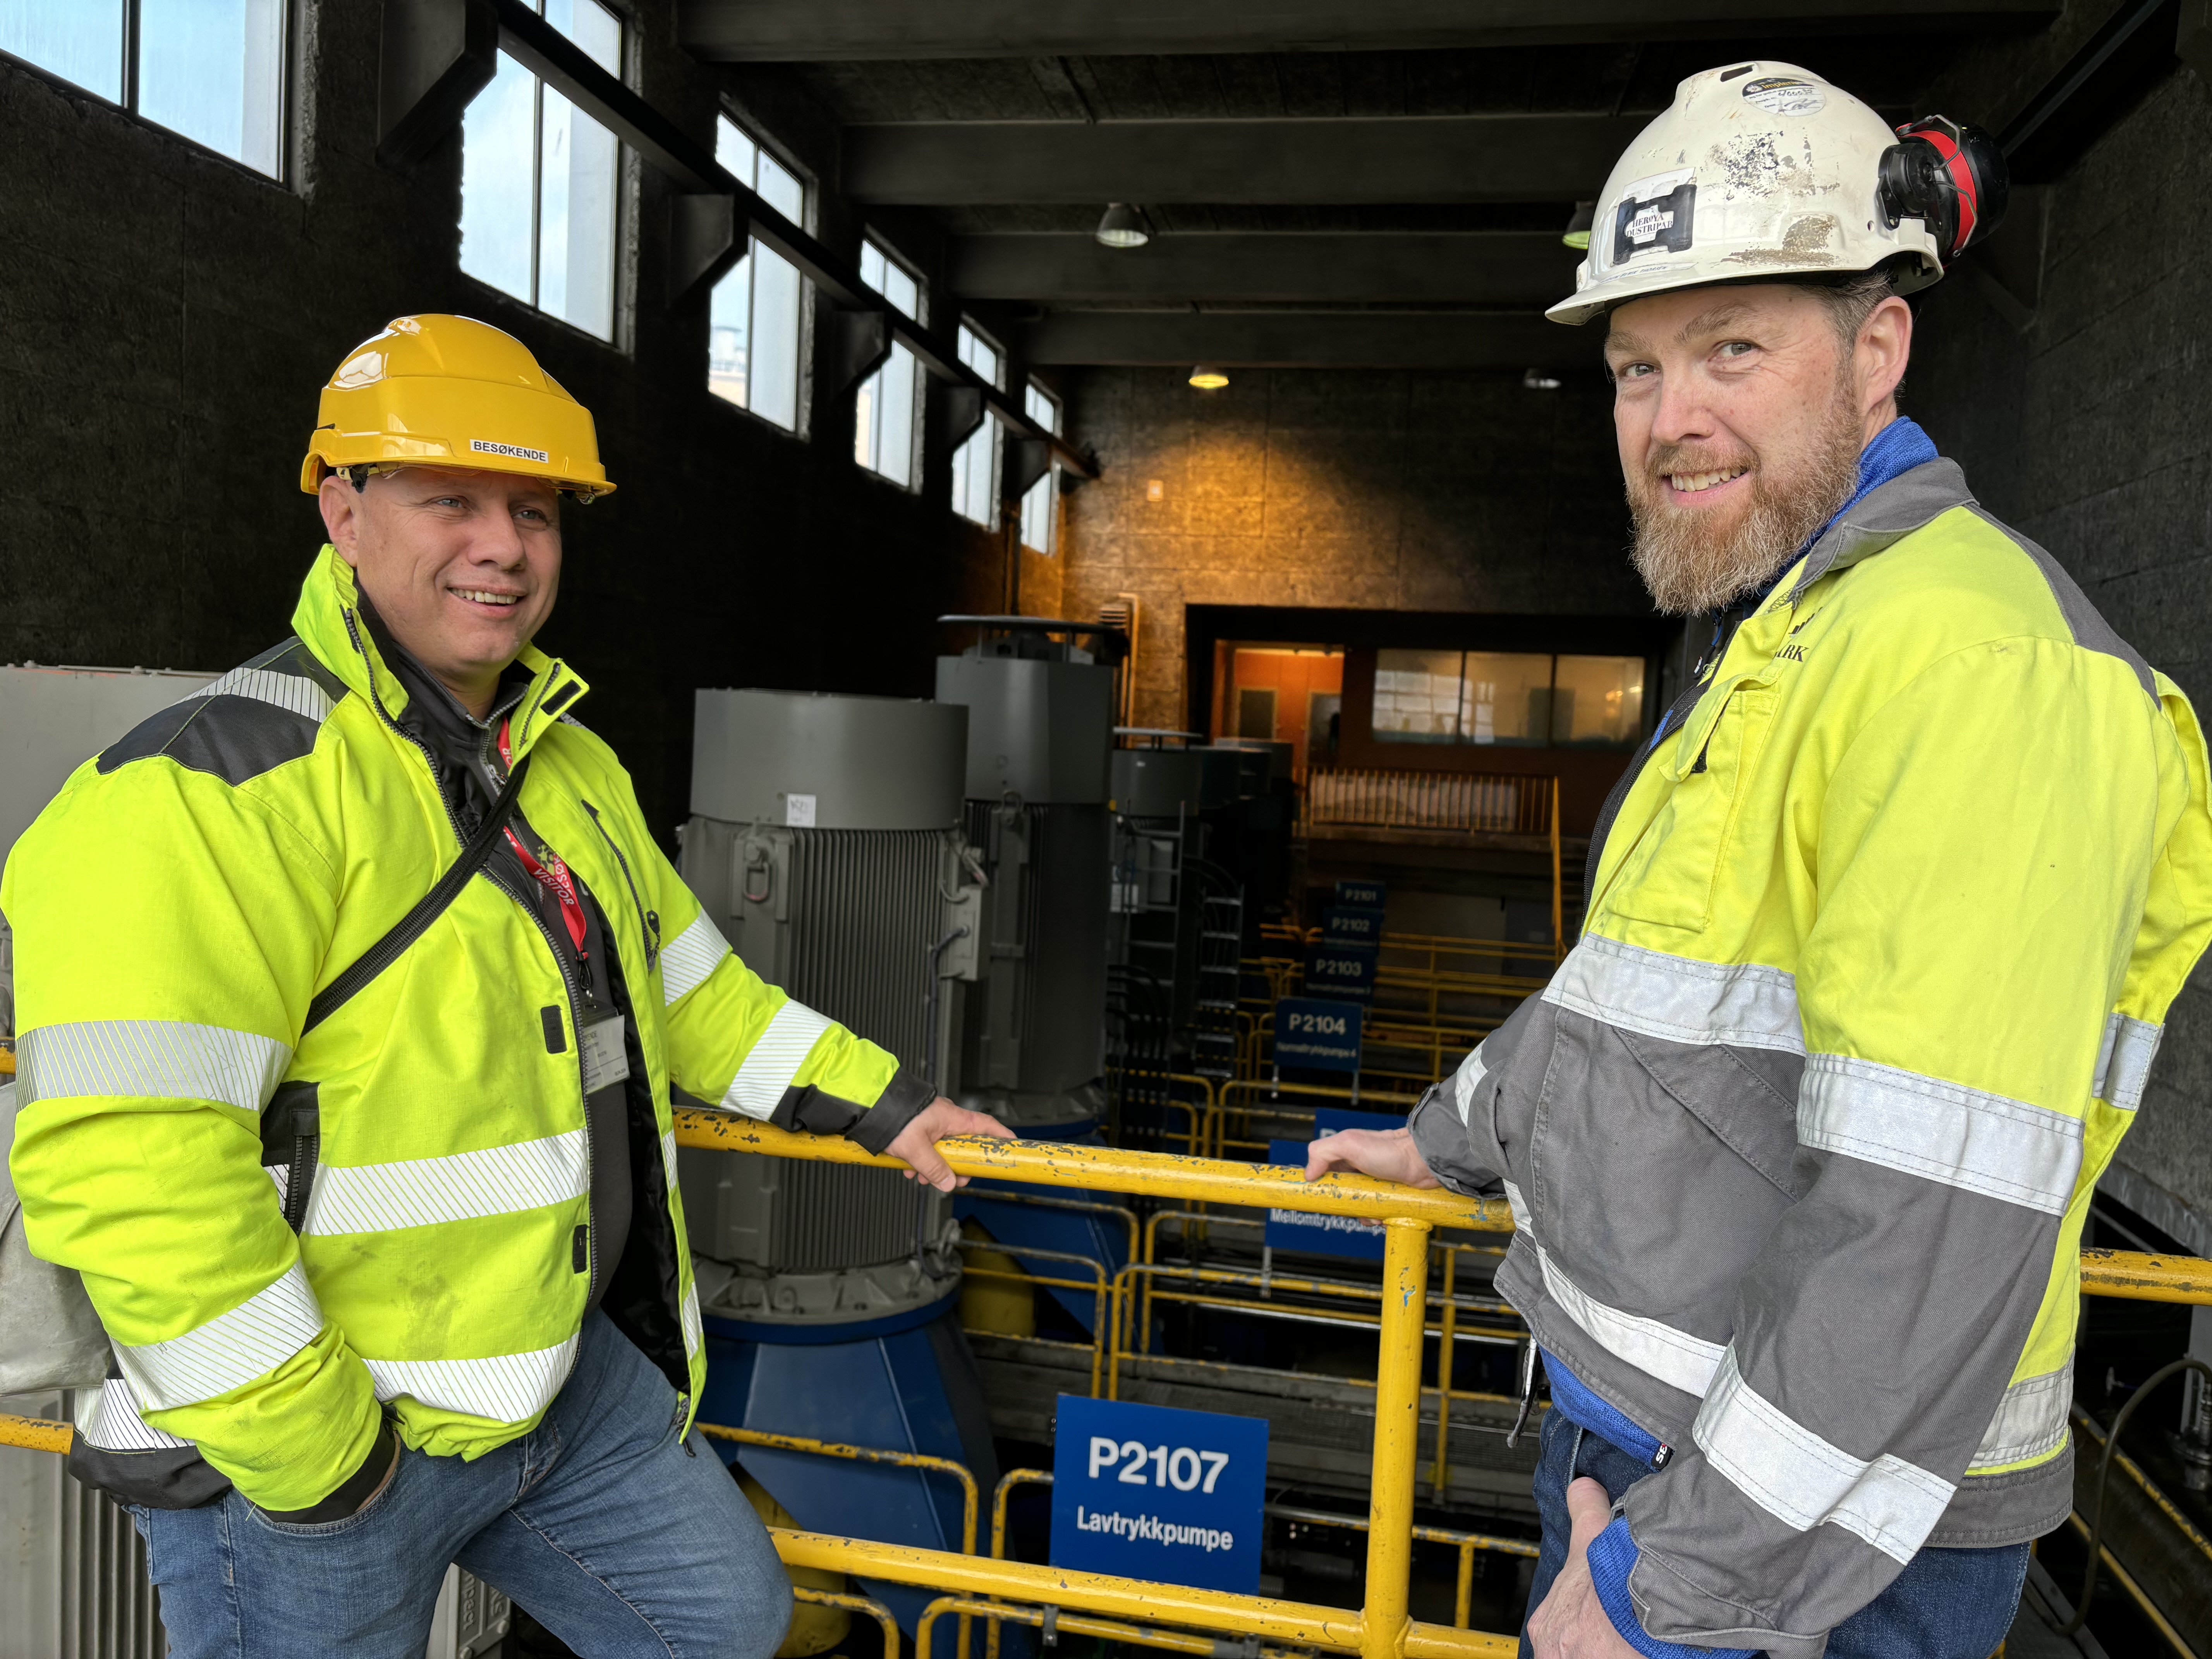 two men pose and stand by a yellow railing, protective equipment, below is a pumping station, large raw water pumps, blue signs on each pump.